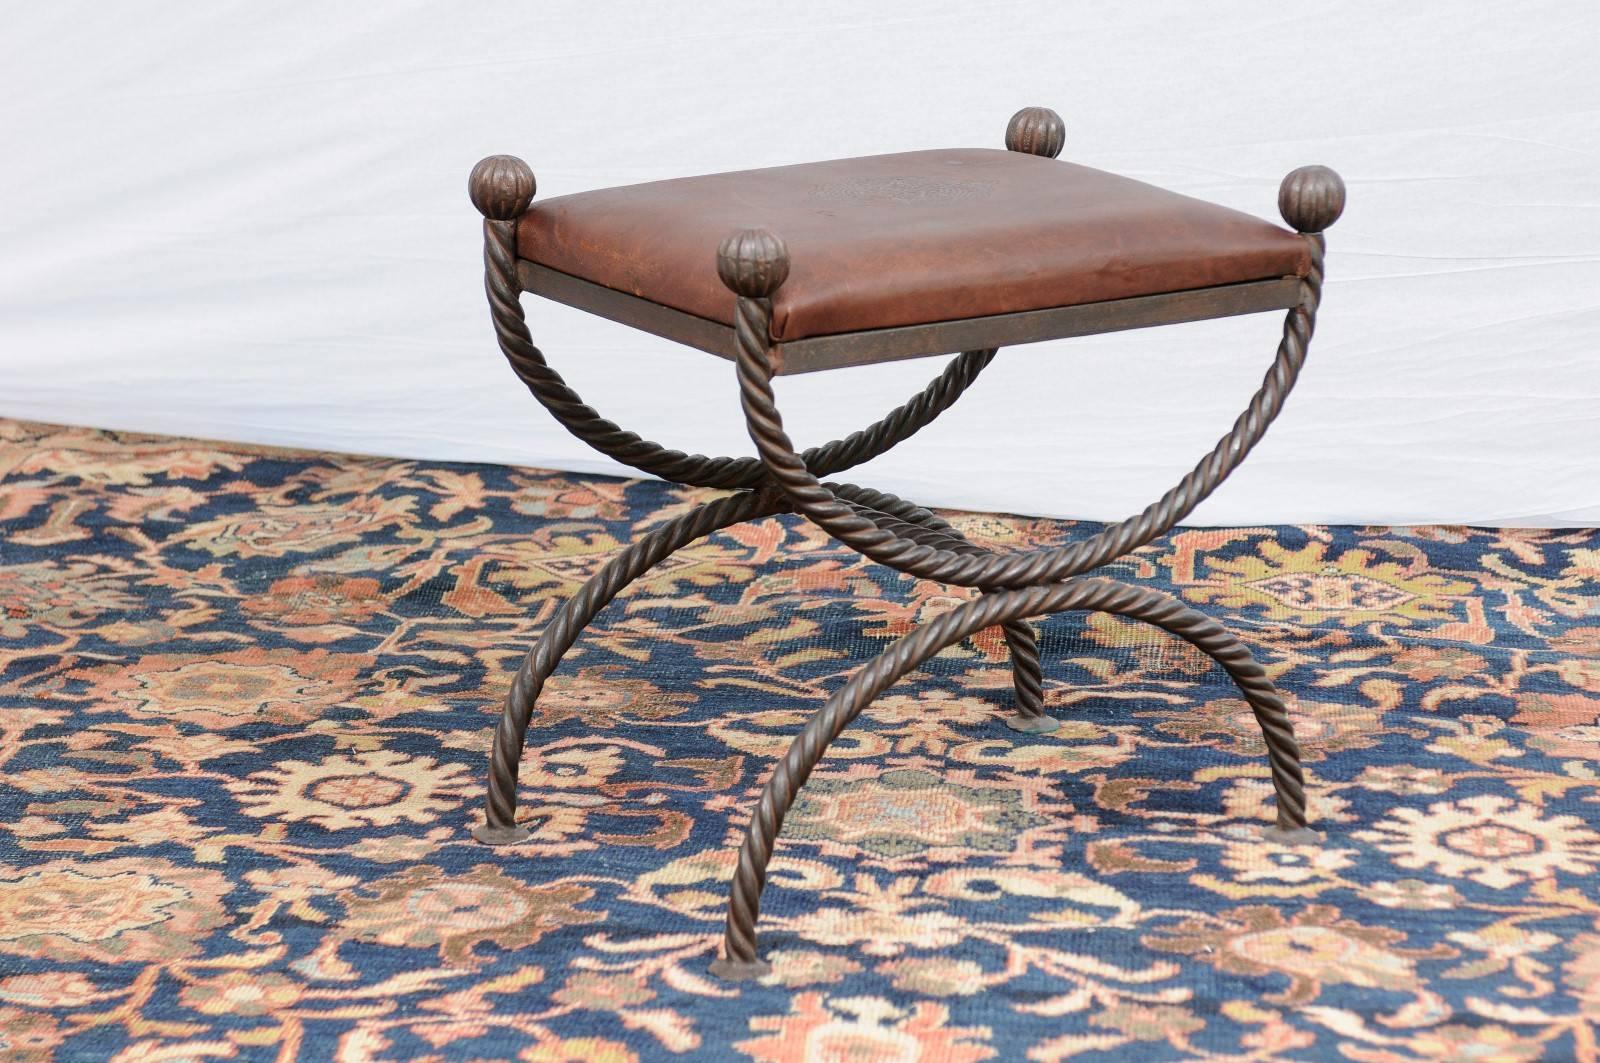 This English Curule style stool from the mid-20th century features a rectangular brown embossed leather seat over a savonarola rope style iron base. Each corner of the seat is marked with a round finial, adorned with gadroon shaped motifs. The